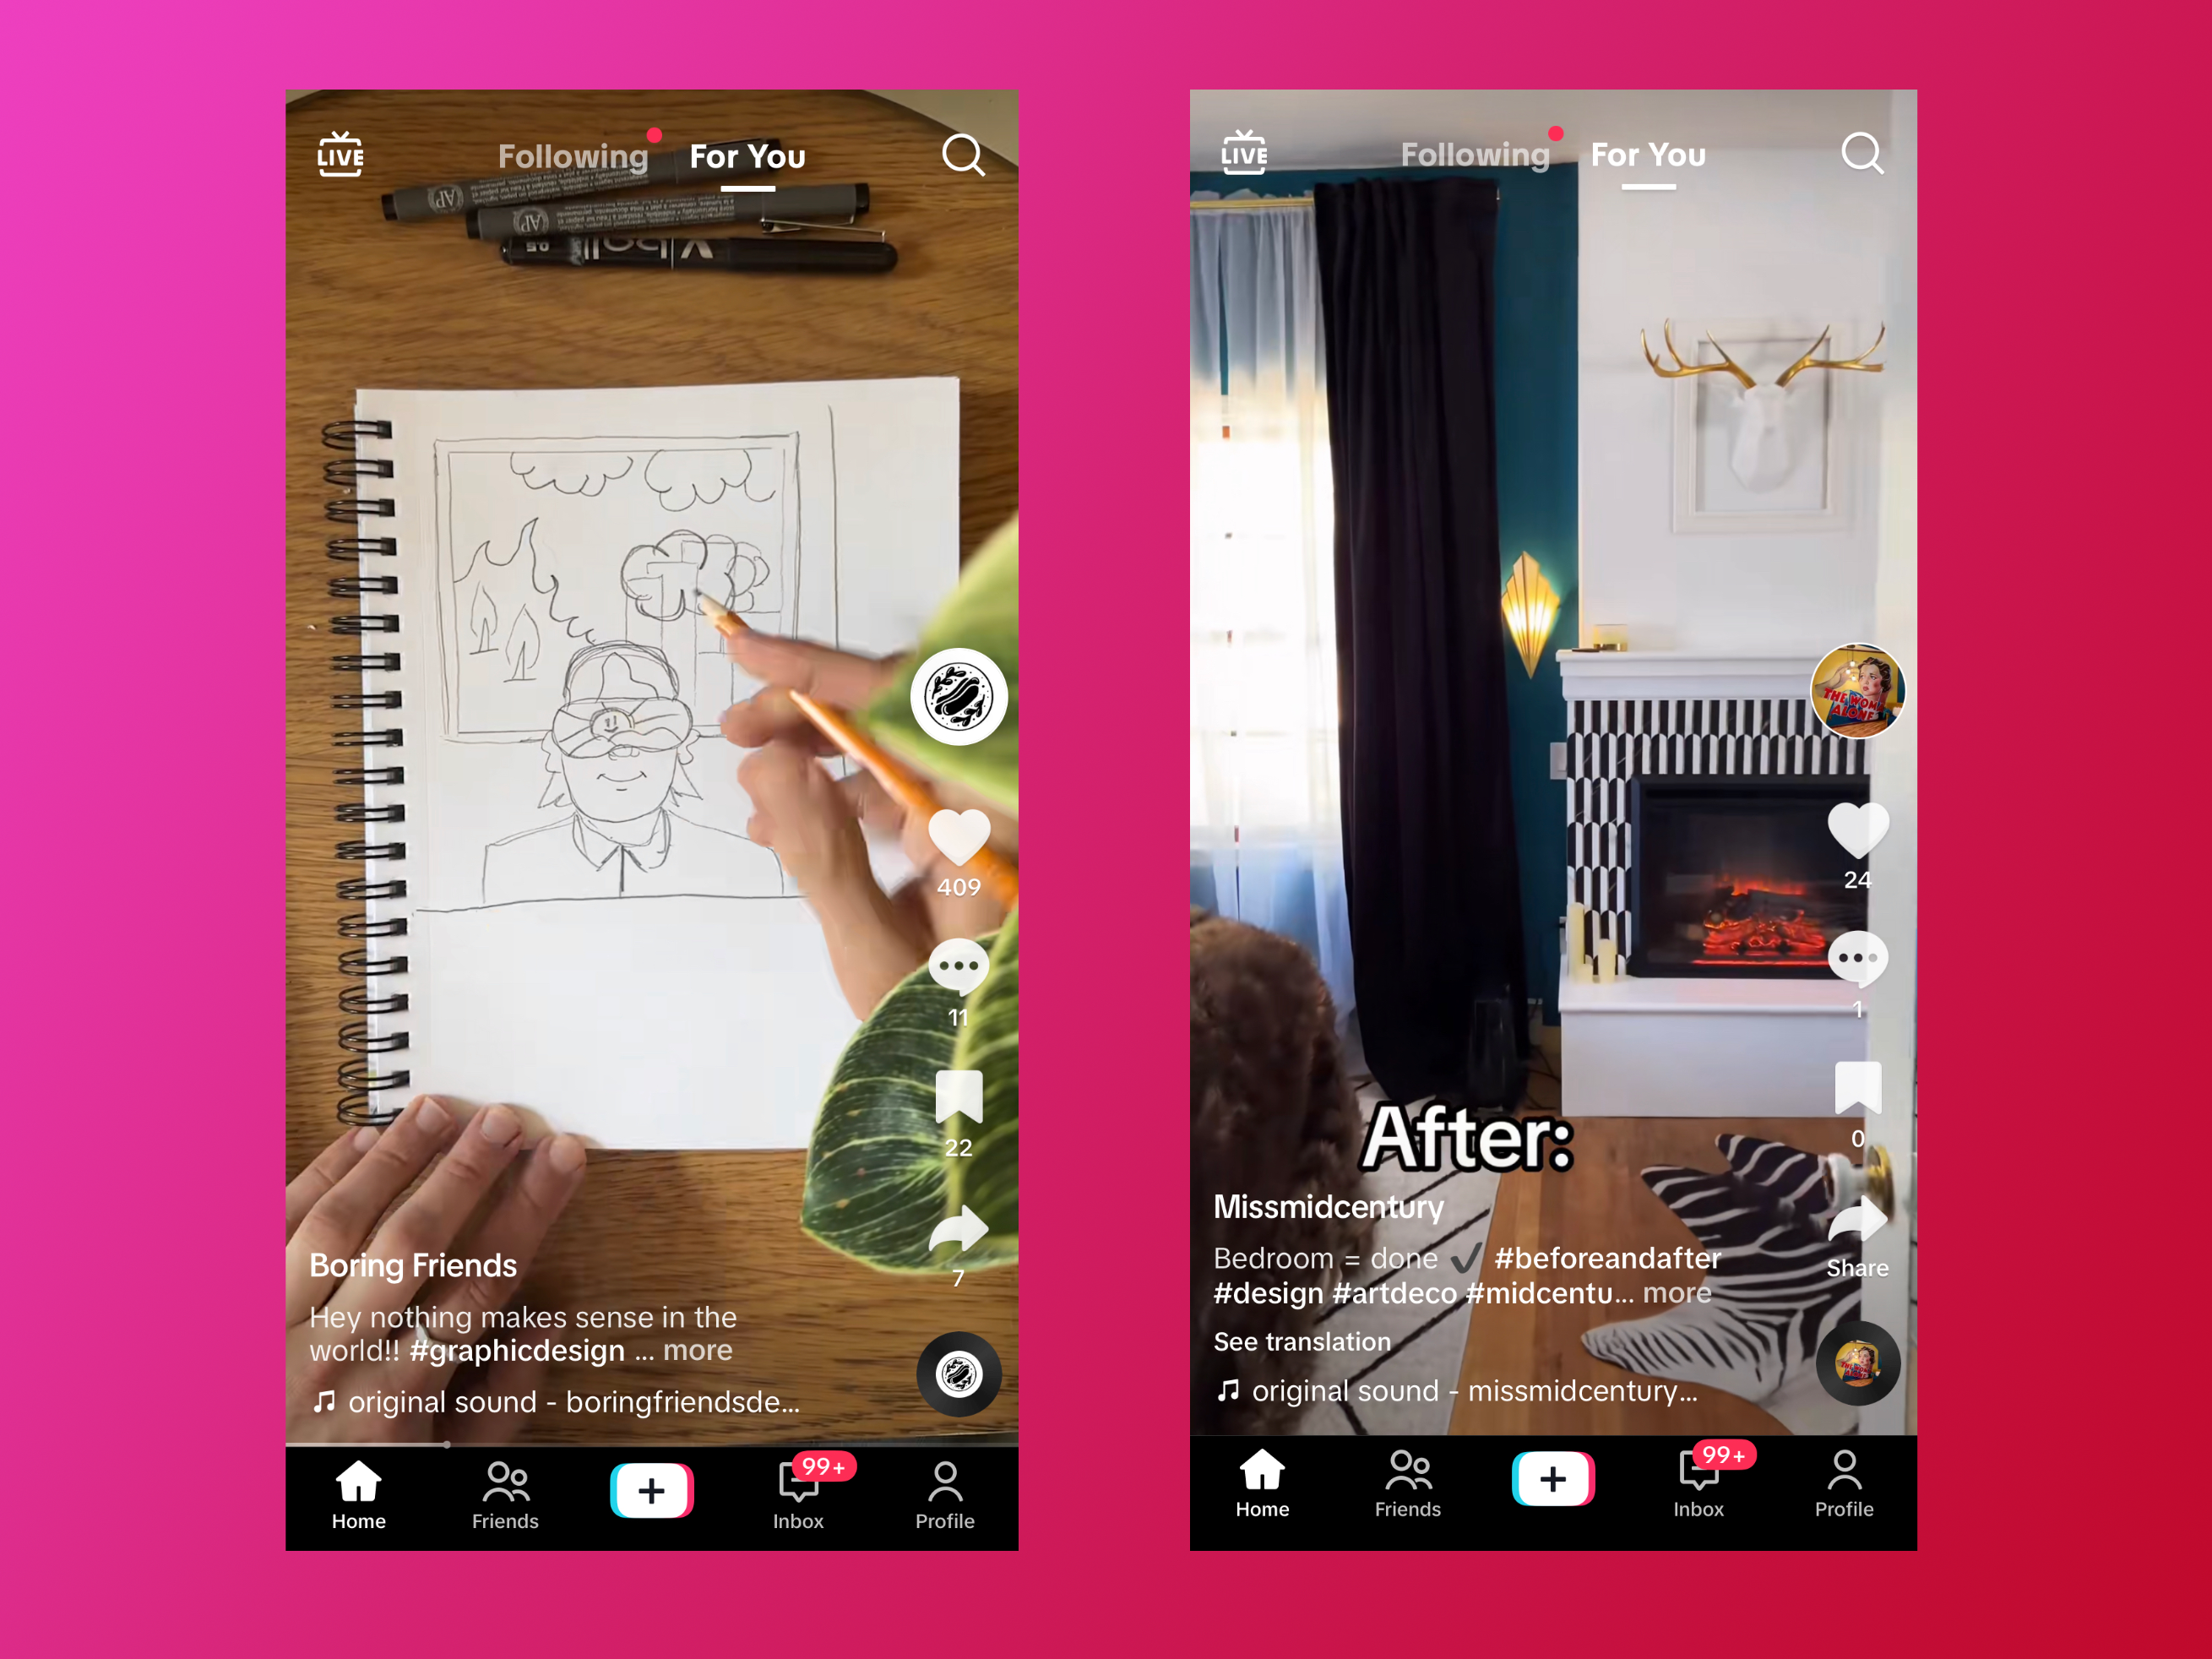 Side by side mobile version of the TikTok UI showing the For You page content